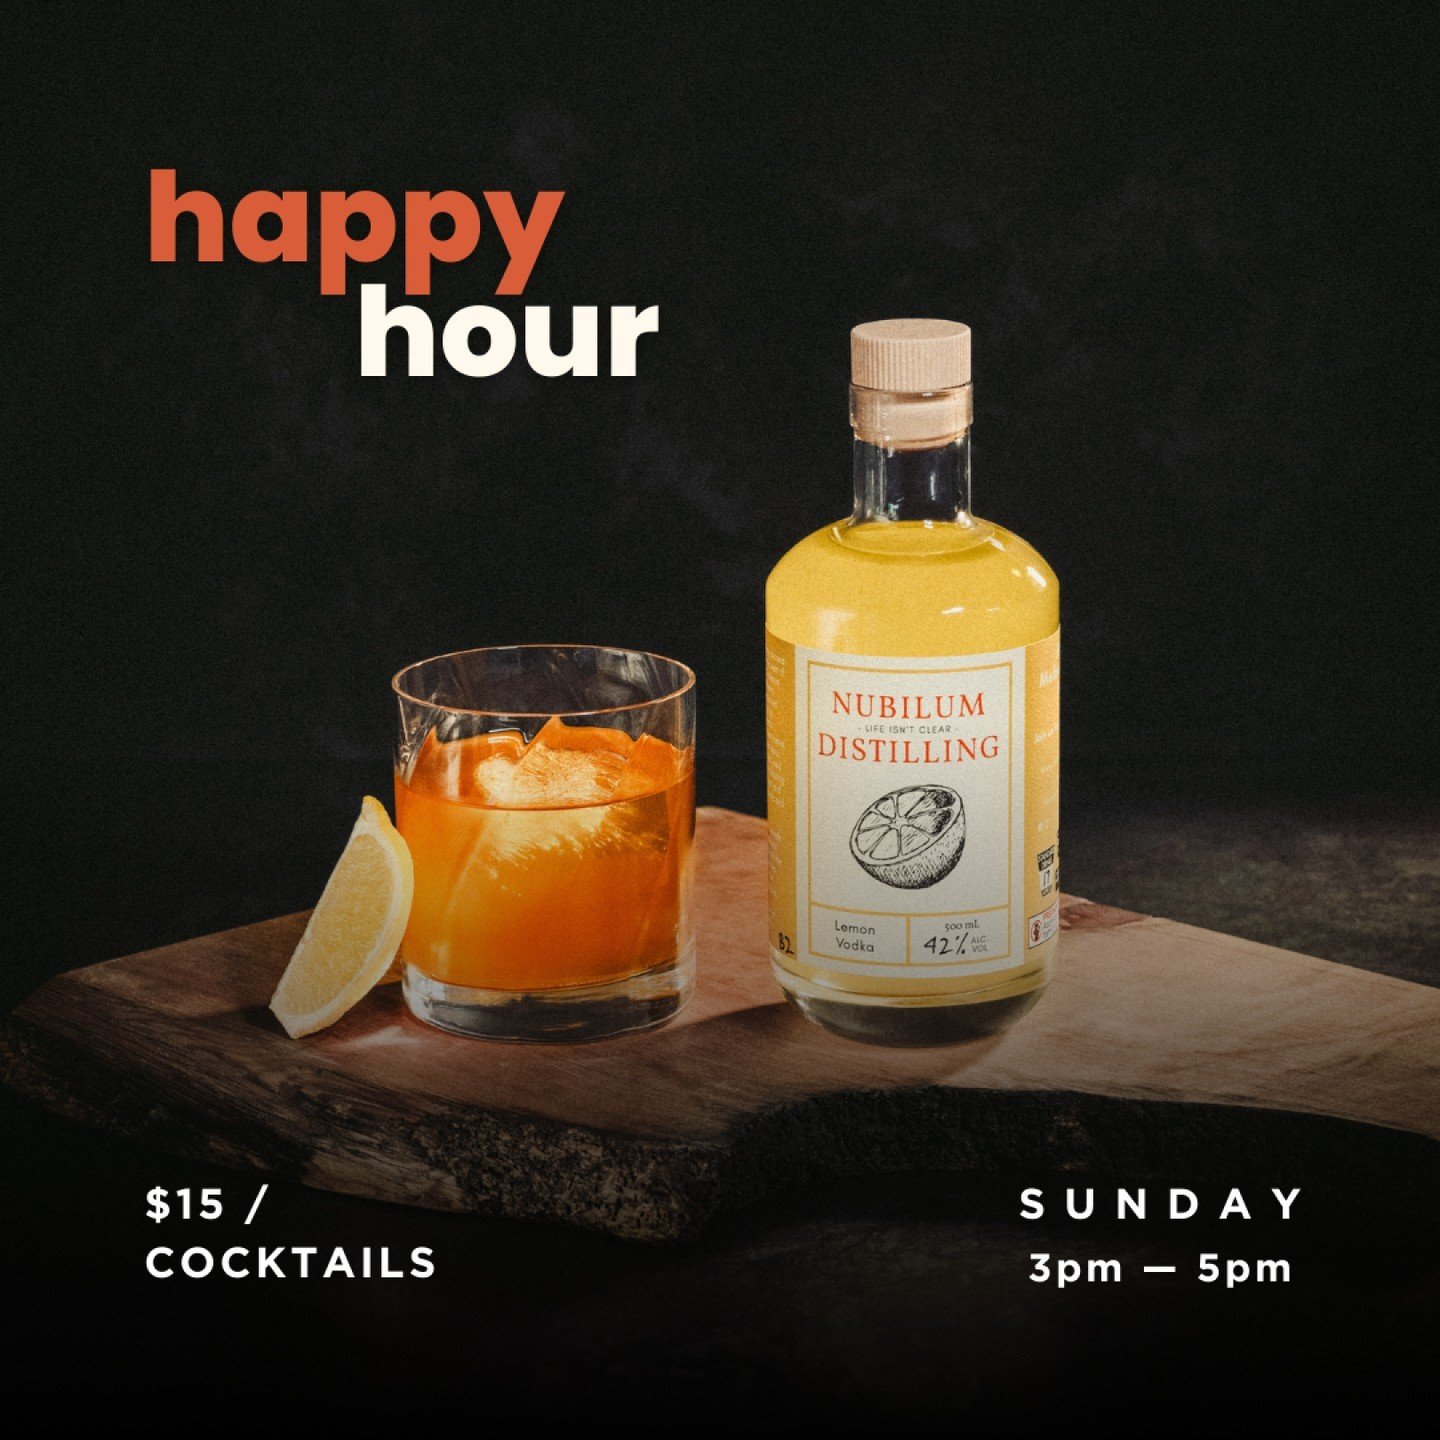 ✨ SURPRISE HAPPY HOUR THIS SUNDAY ✨

If you're looking for something to do on Mother's Day; whether you're looking to spend quality time with your mum or need somewhere chill to relax after Eurofest on Saturday, we've got you covered.

We're running 